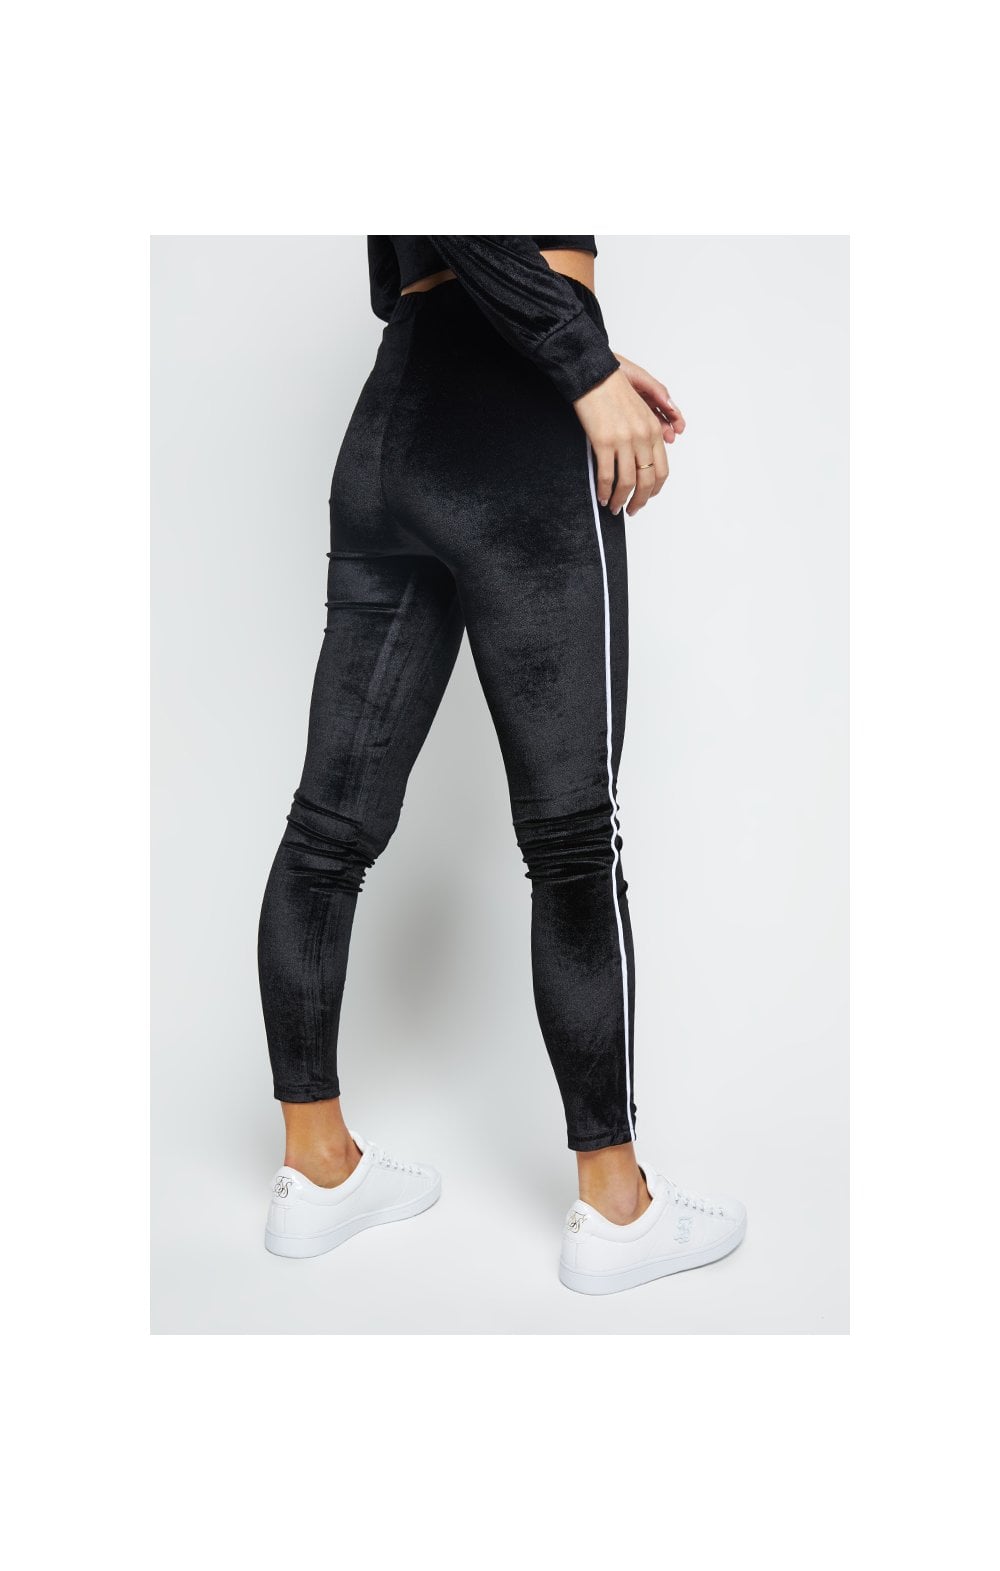 Load image into Gallery viewer, SikSilk Velour Piping Leggings - Black (4)